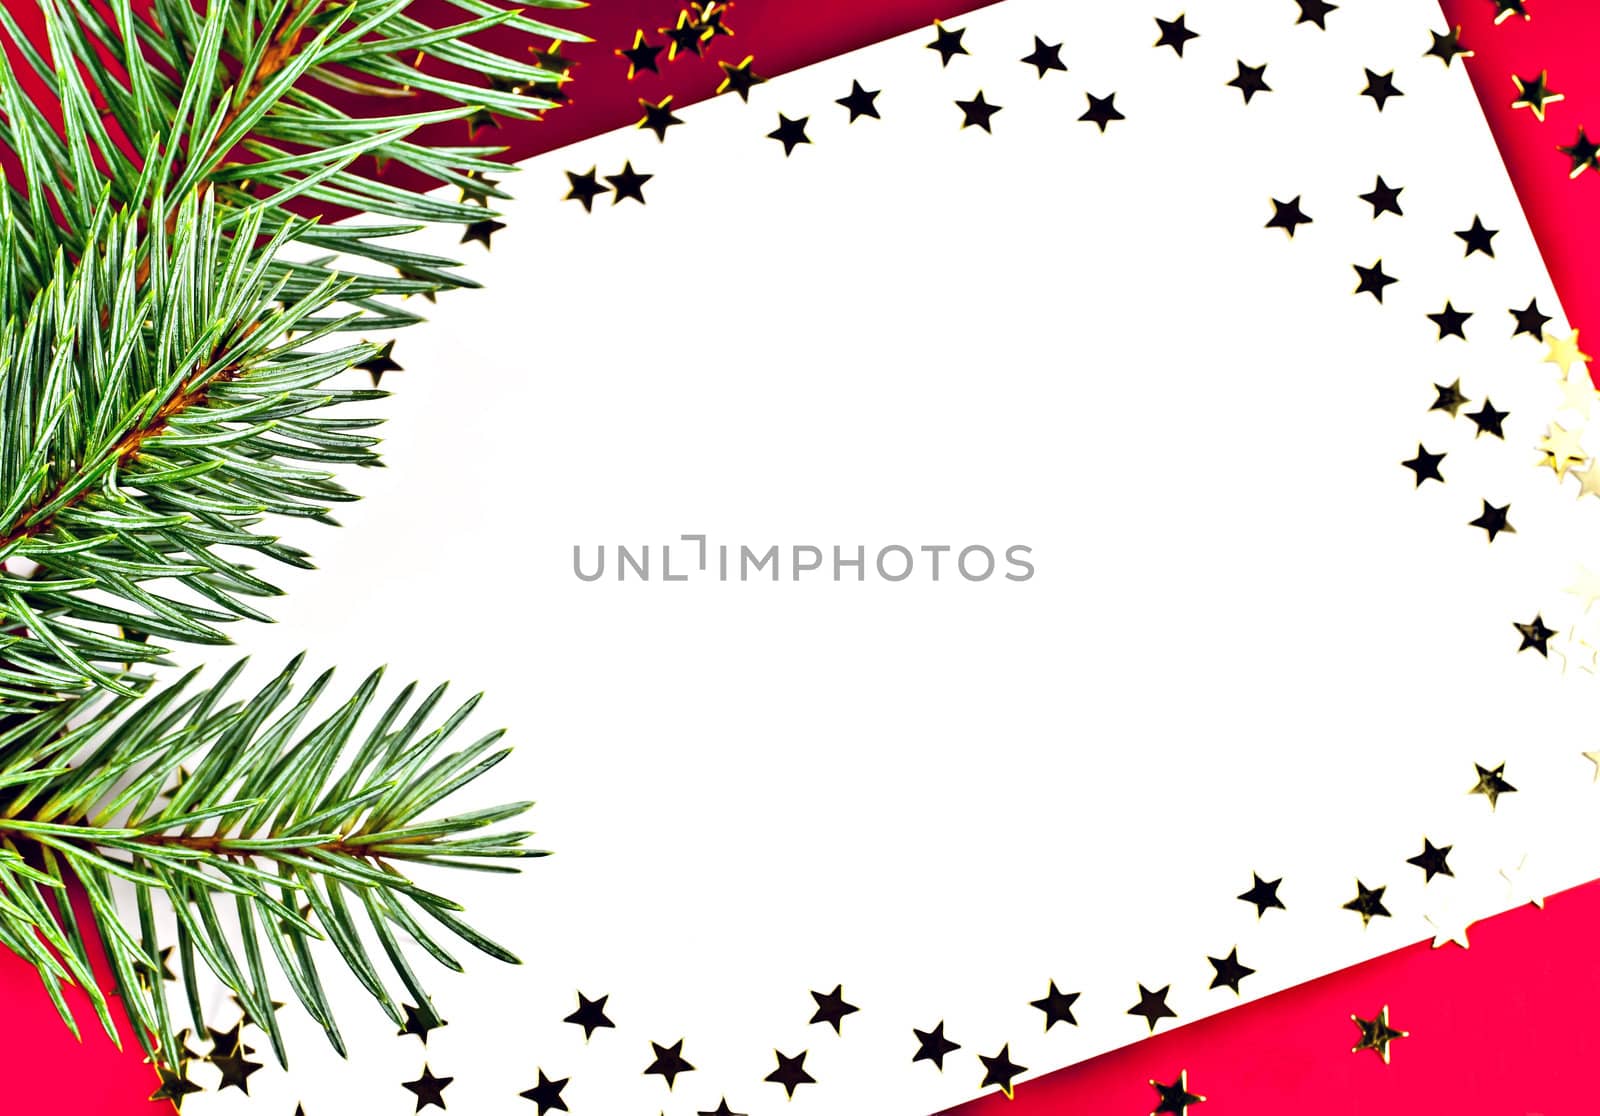 On a red background white greeting card with spruce twigs and golden stars.